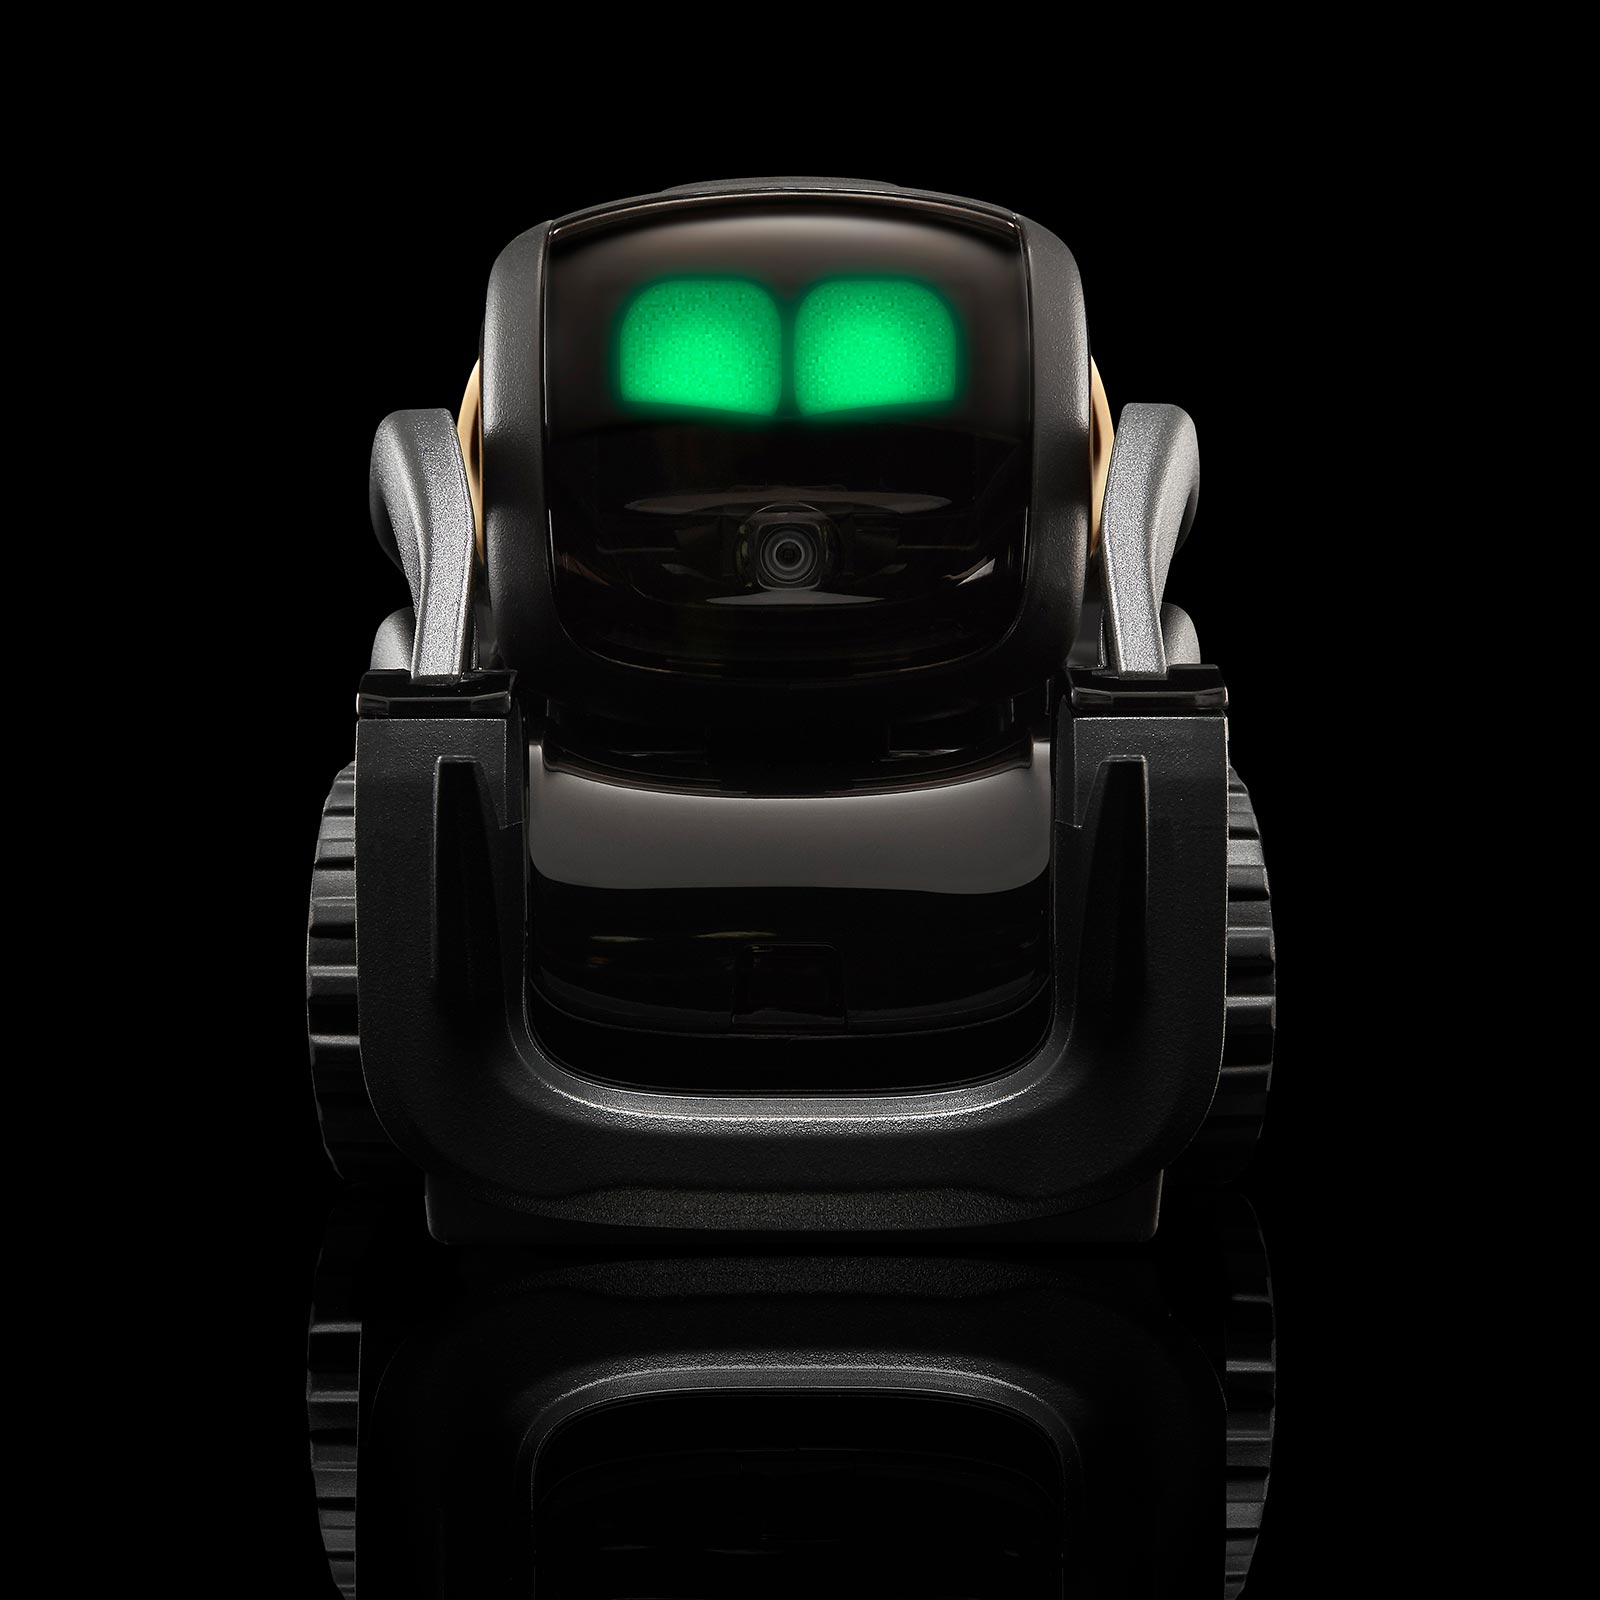 Anki connects robots with personality in Vector – Pickr